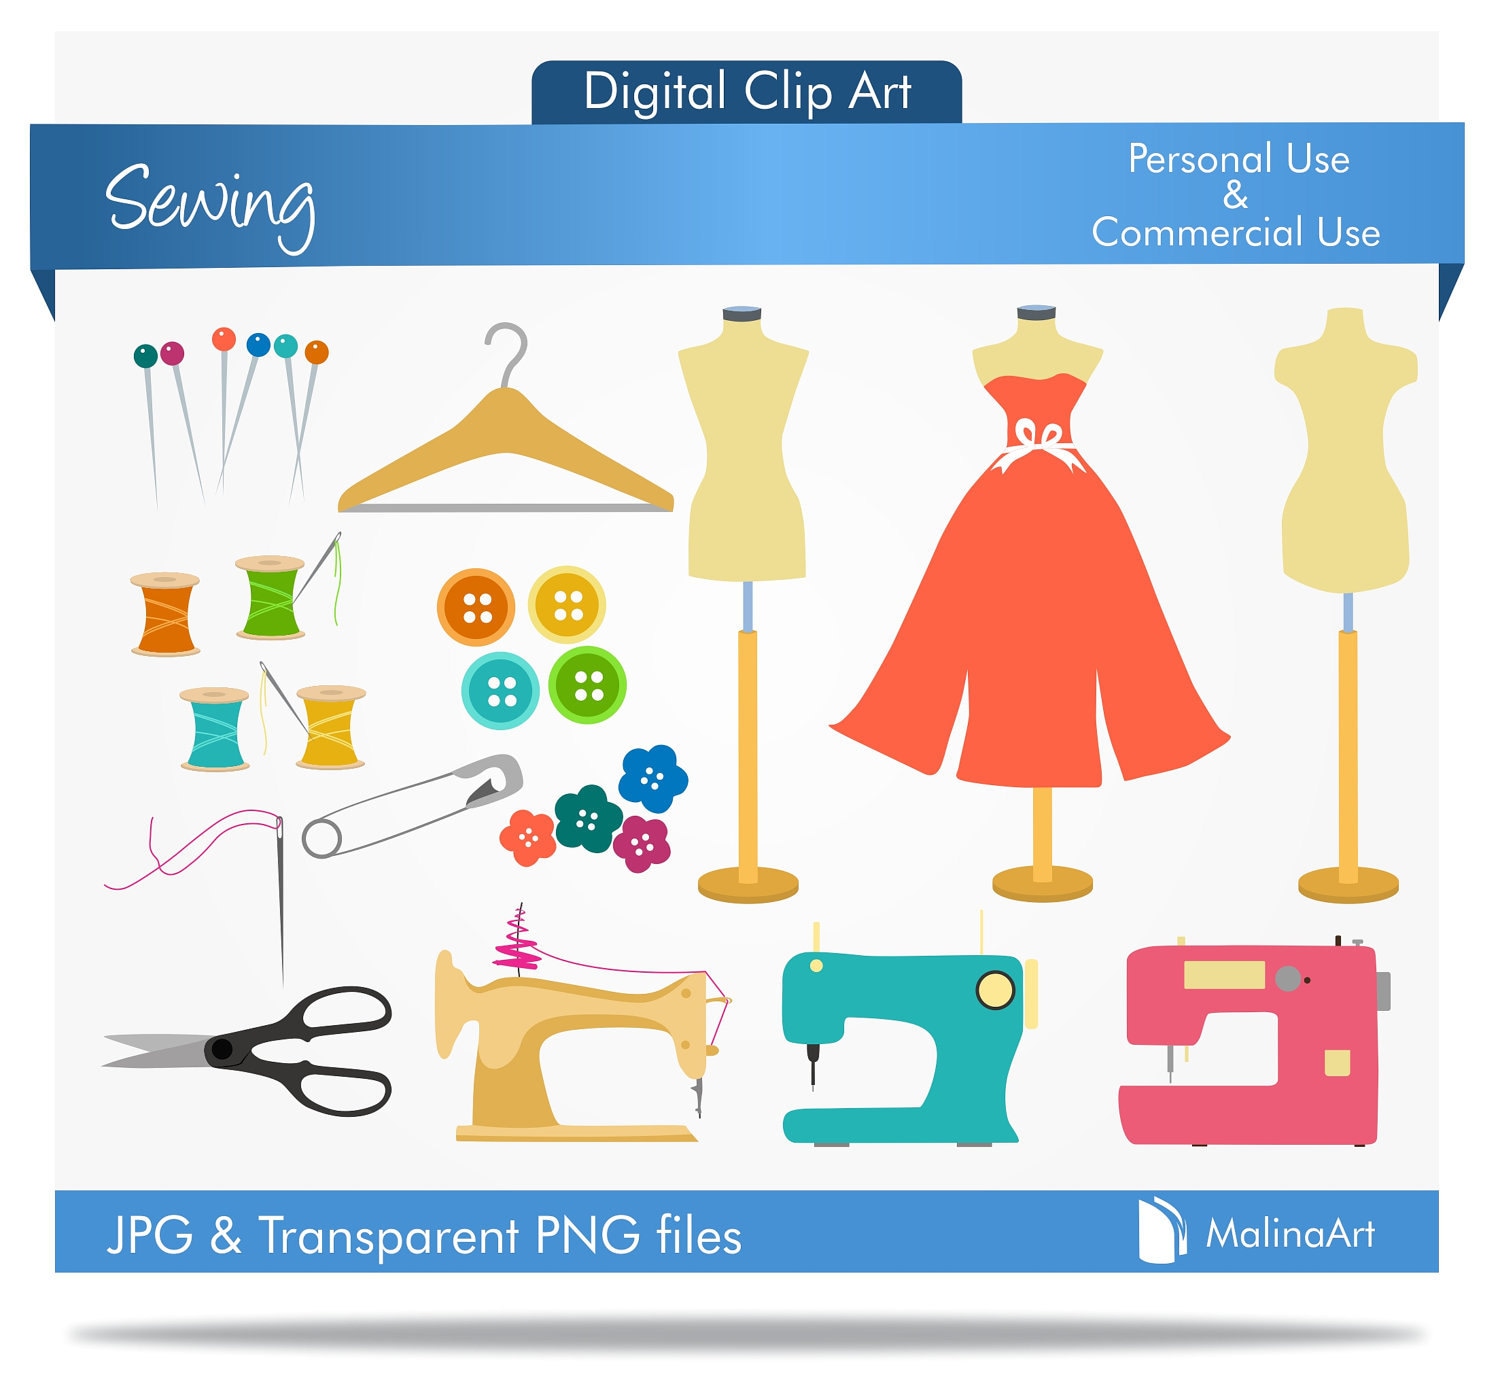 Sewing clipart...Digital clipart...Sew clipart...BUY 1 GET 1